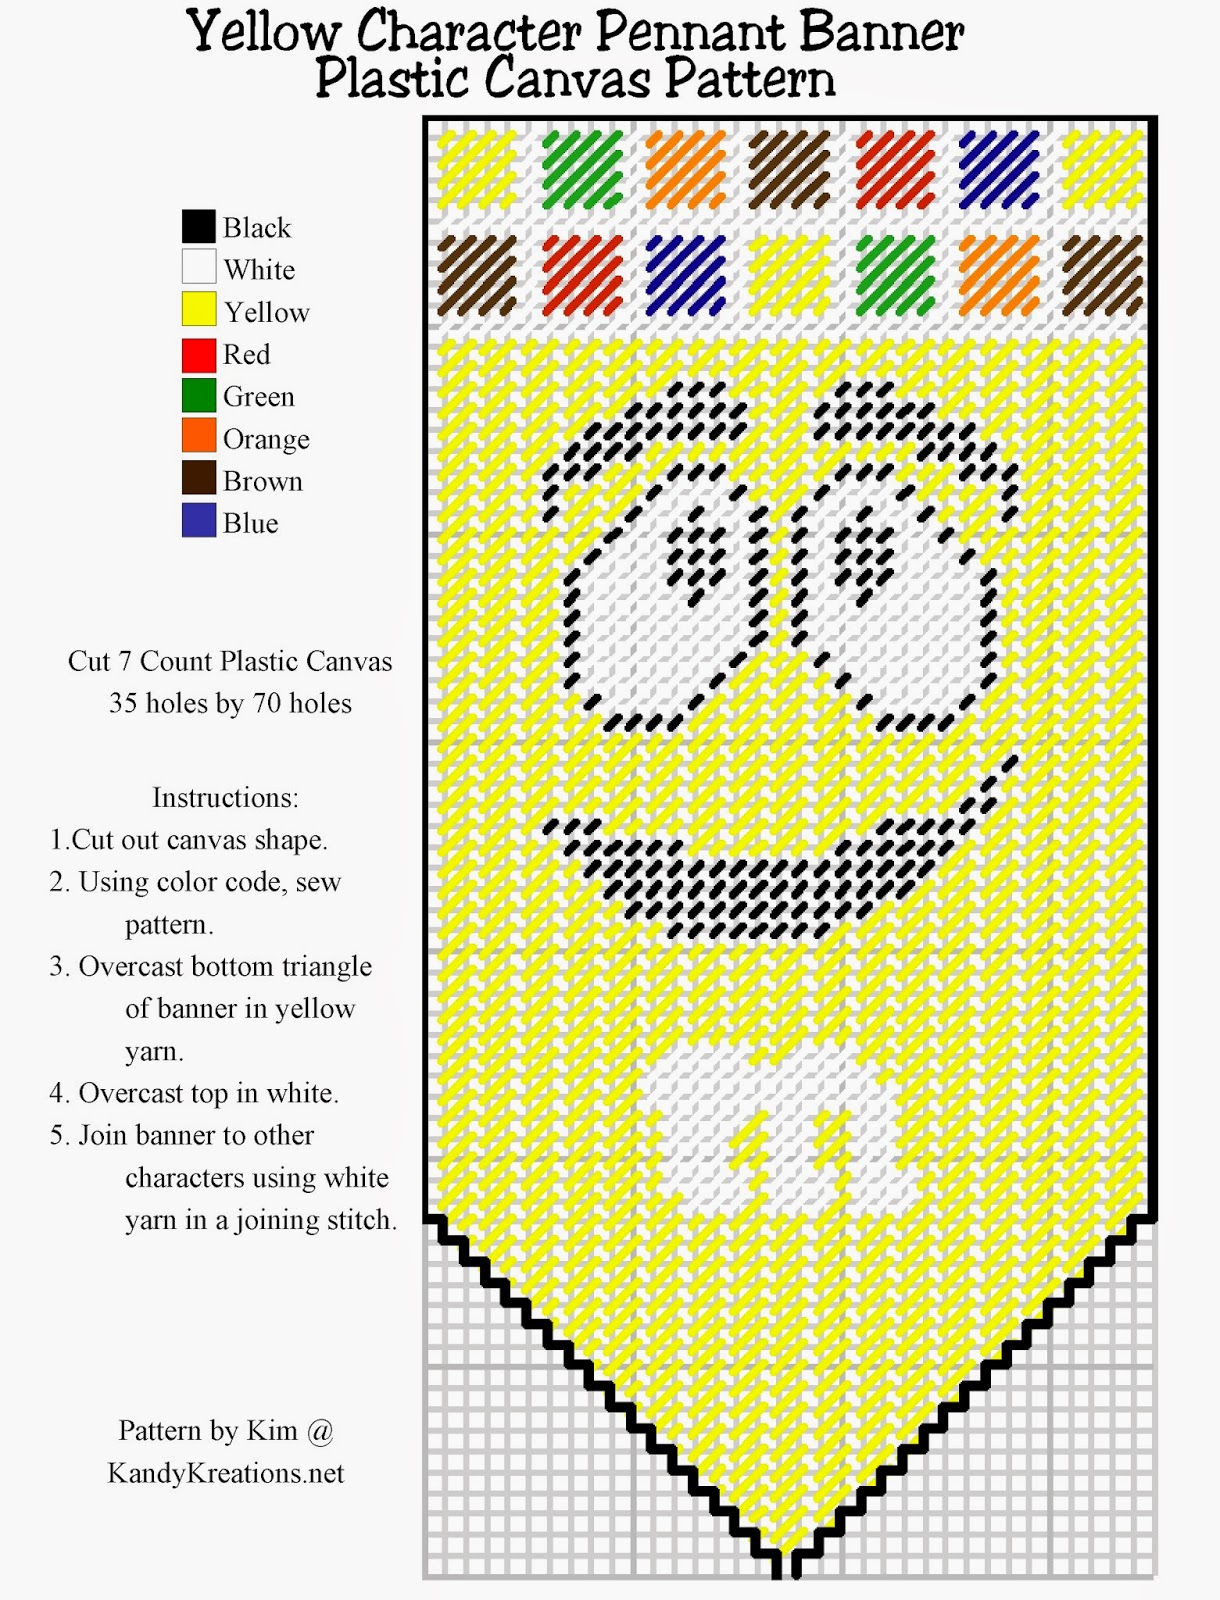 Make your own pennant banner with the yellow M&M character using this Plastic canvas pattern freebie.  Simply right click and save this pattern to create your own party decoration or kitchen decor.